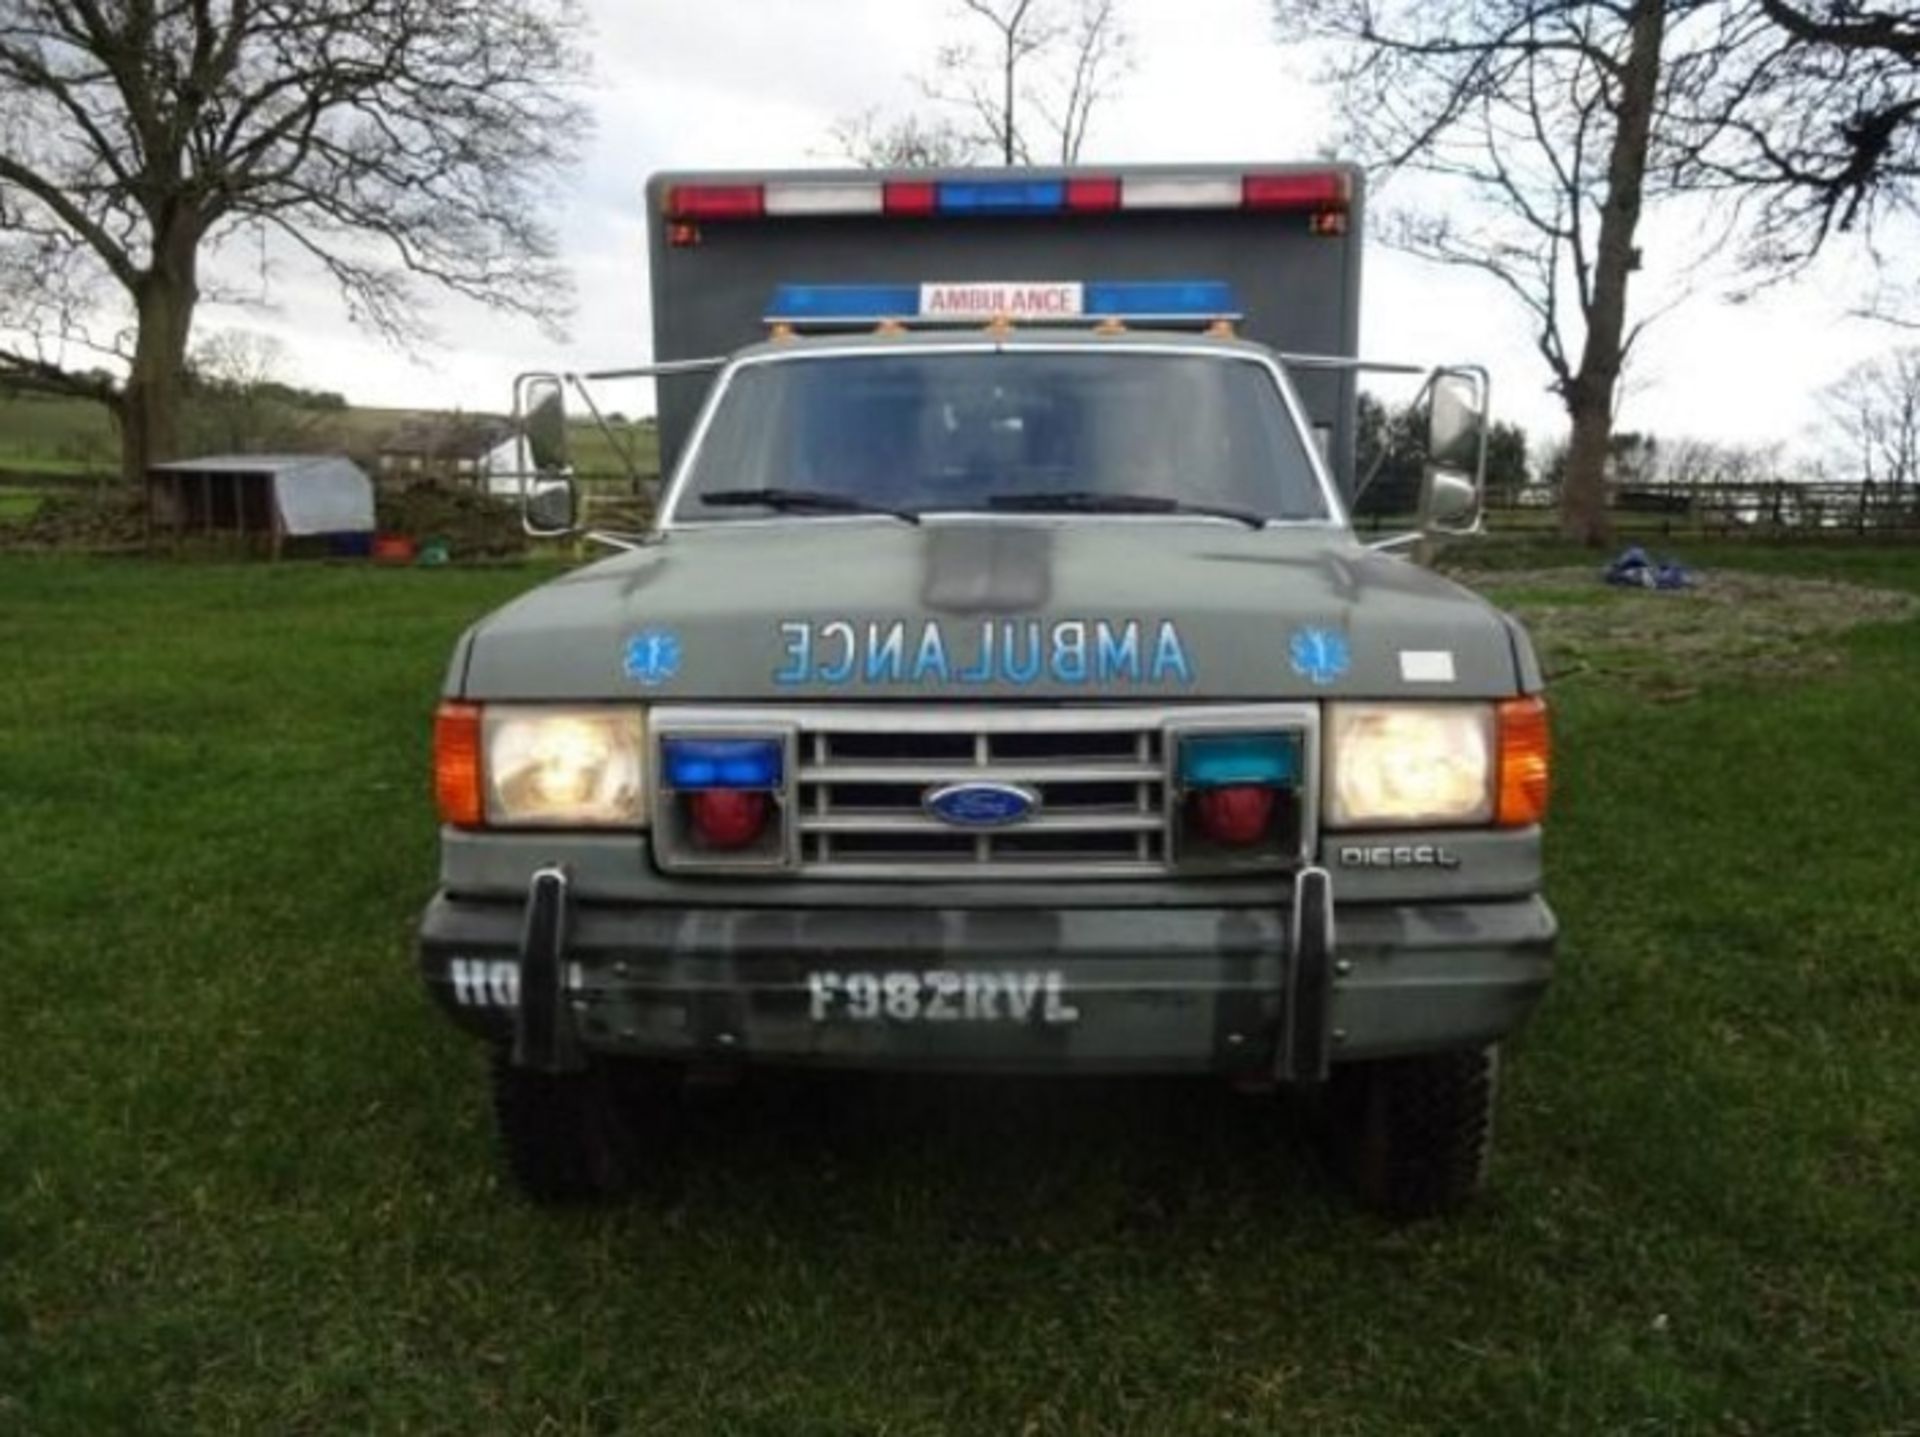 1989 Ford Military Ambulance - Image 2 of 9